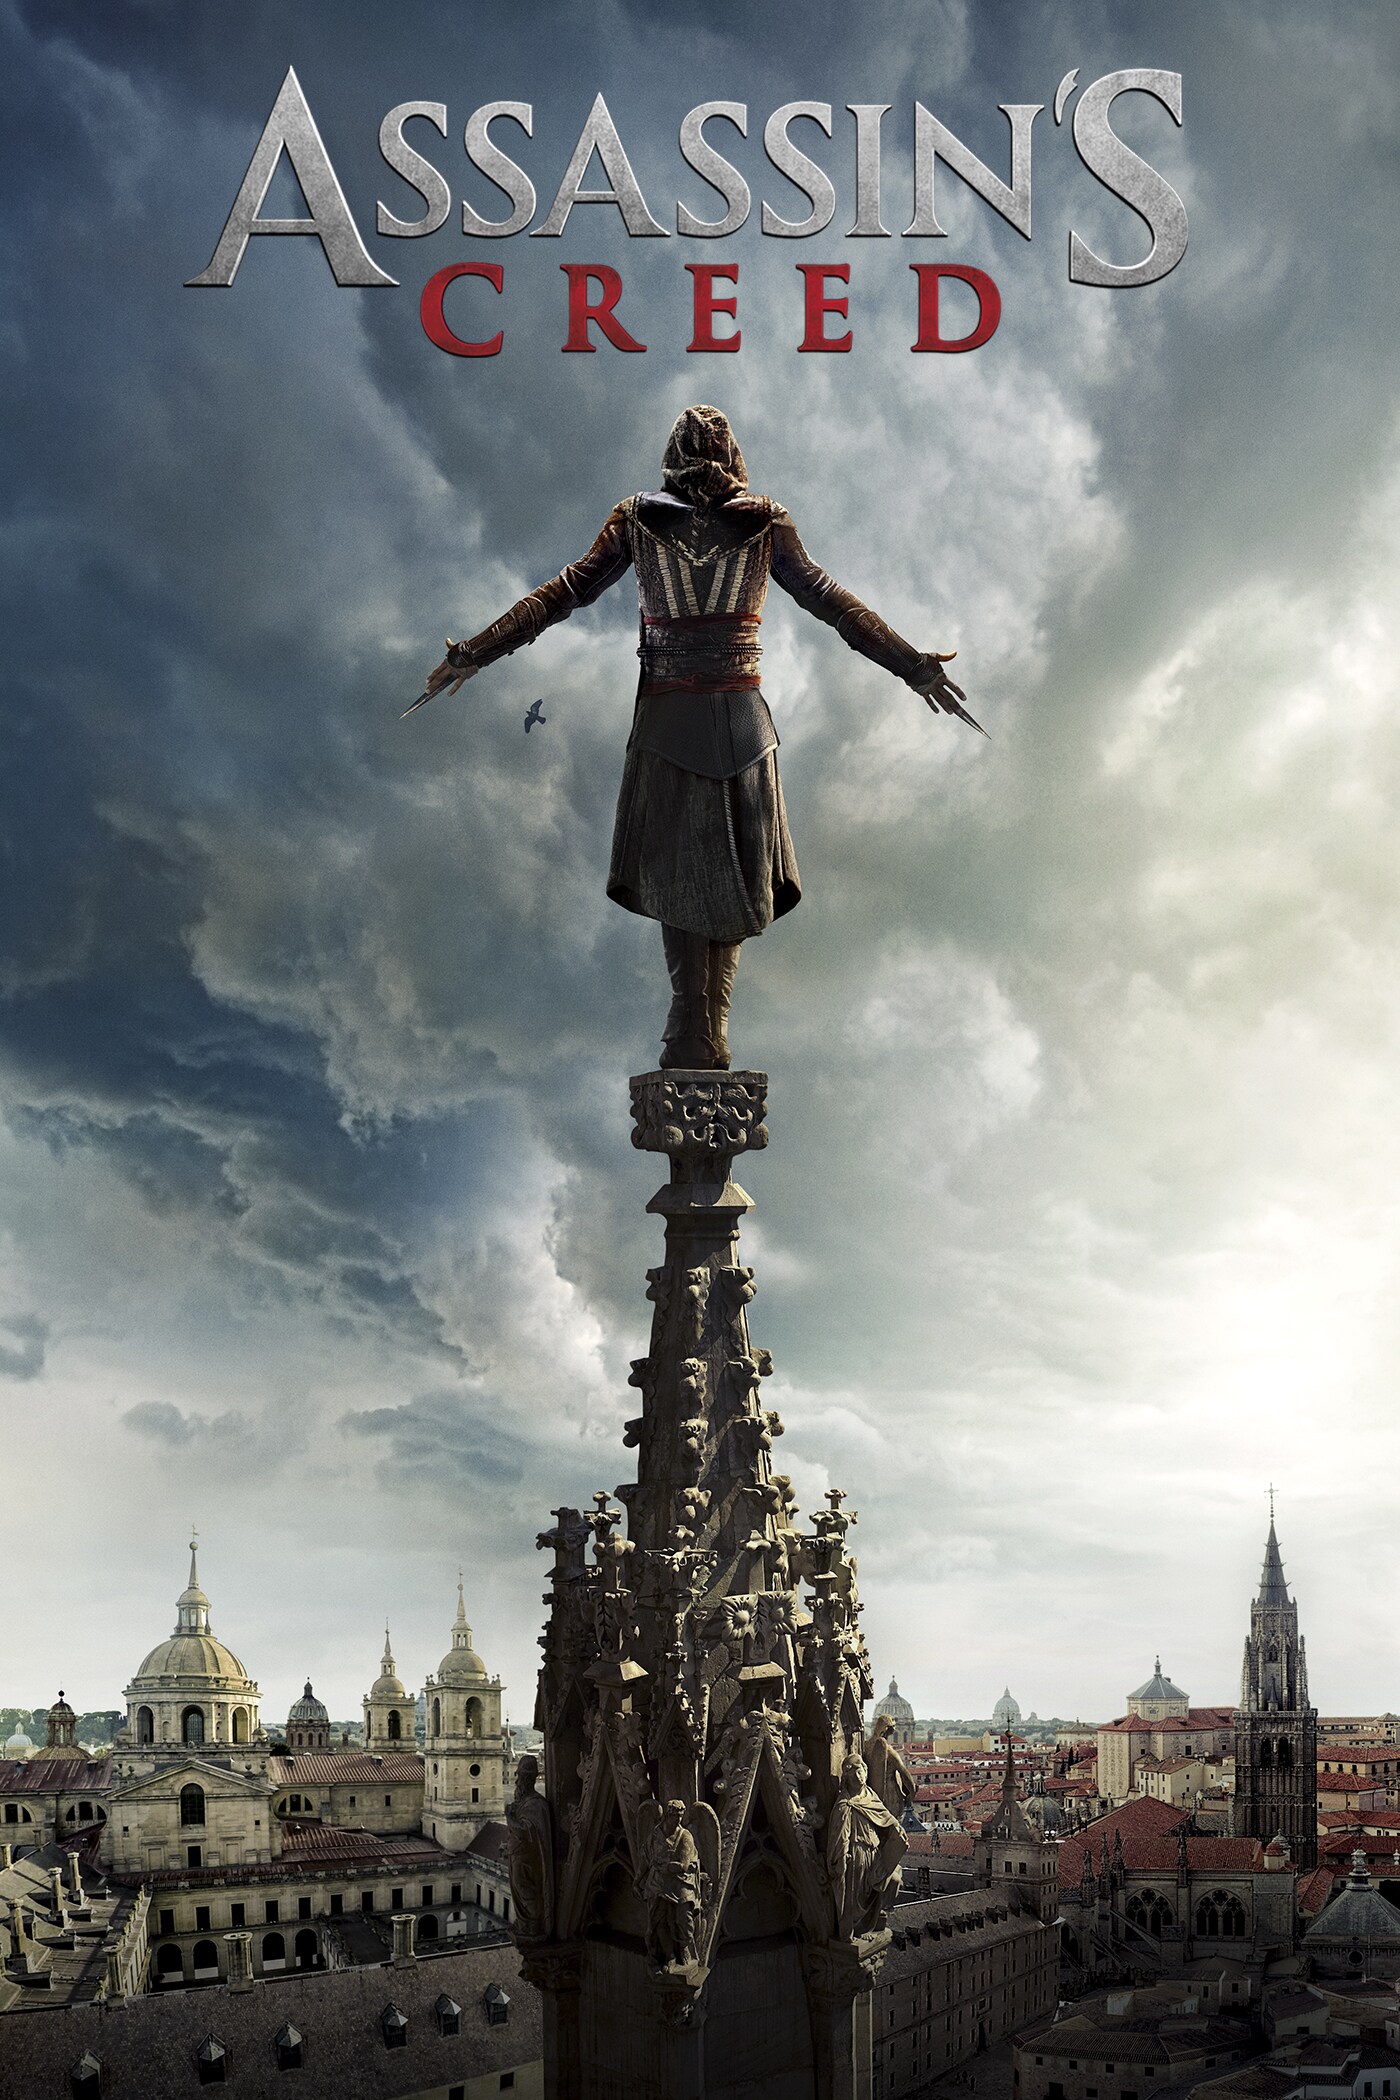 Assassin's Creed movie poster